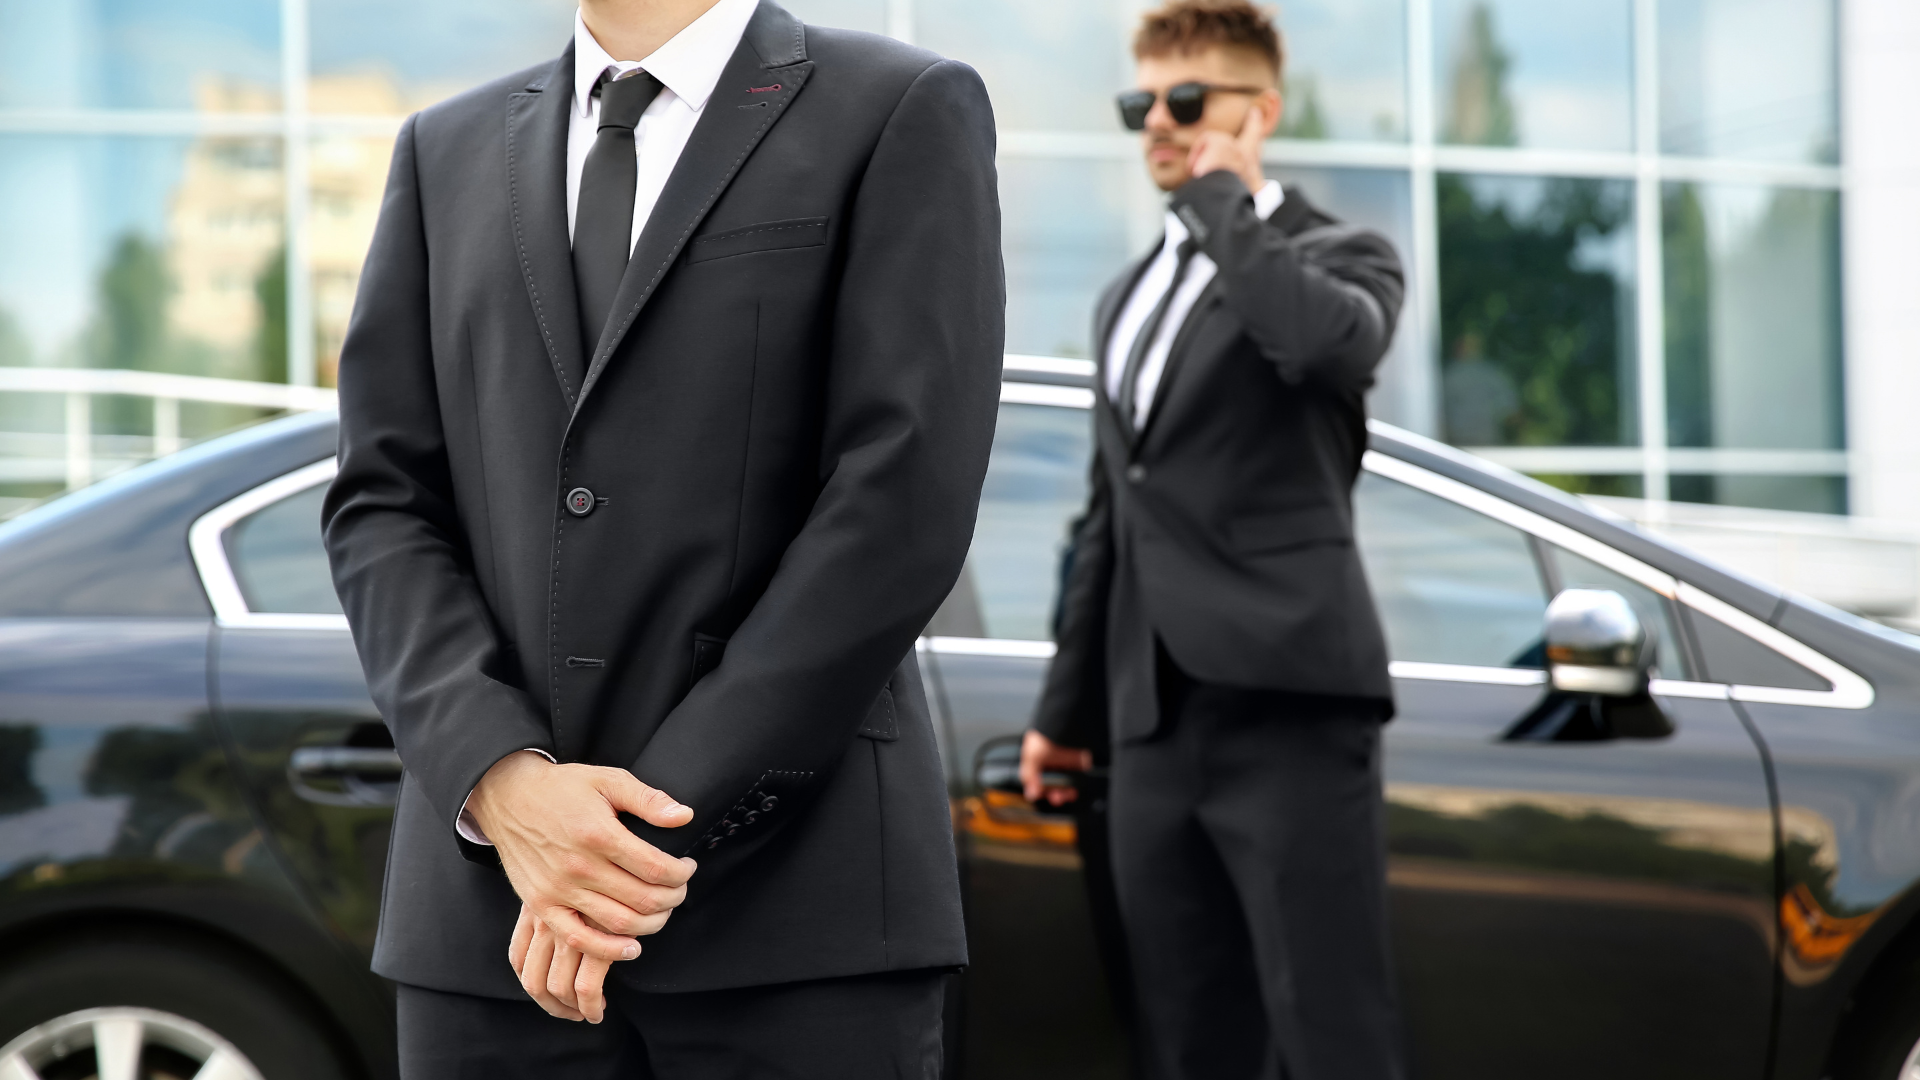 The Growing Demand for Private Security Services 2